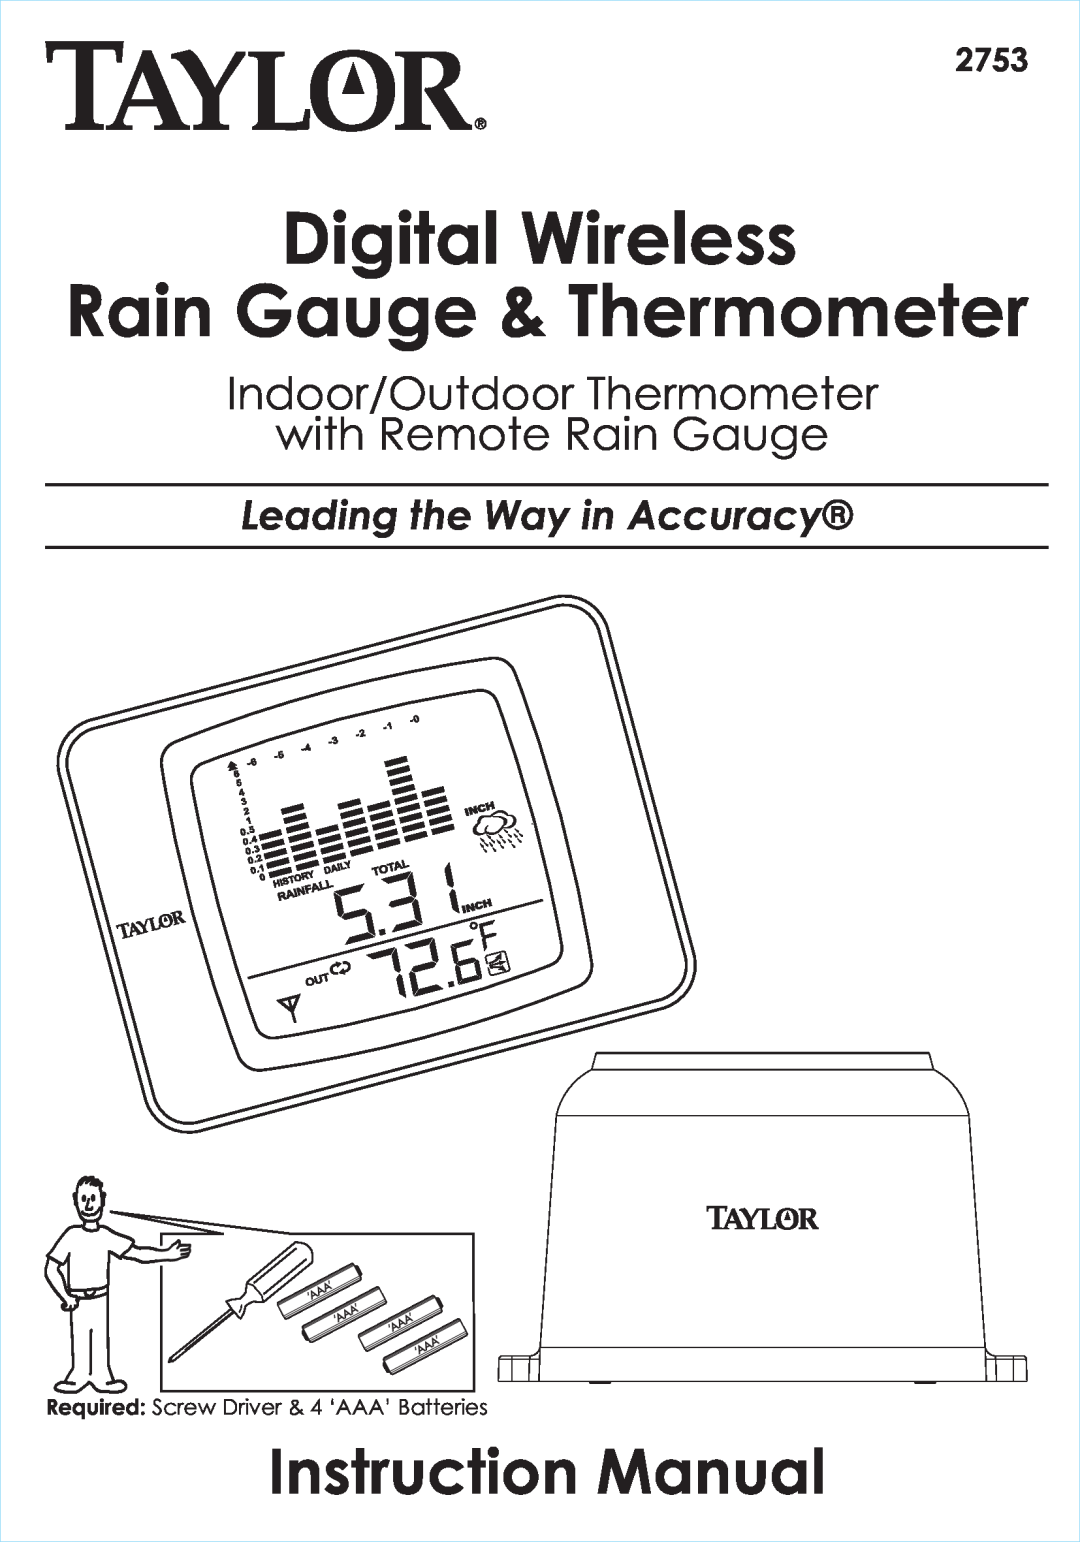 Taylor 2753 instruction manual Digital Wireless Rain Gauge & Thermometer, Leading the Way in Accuracy 